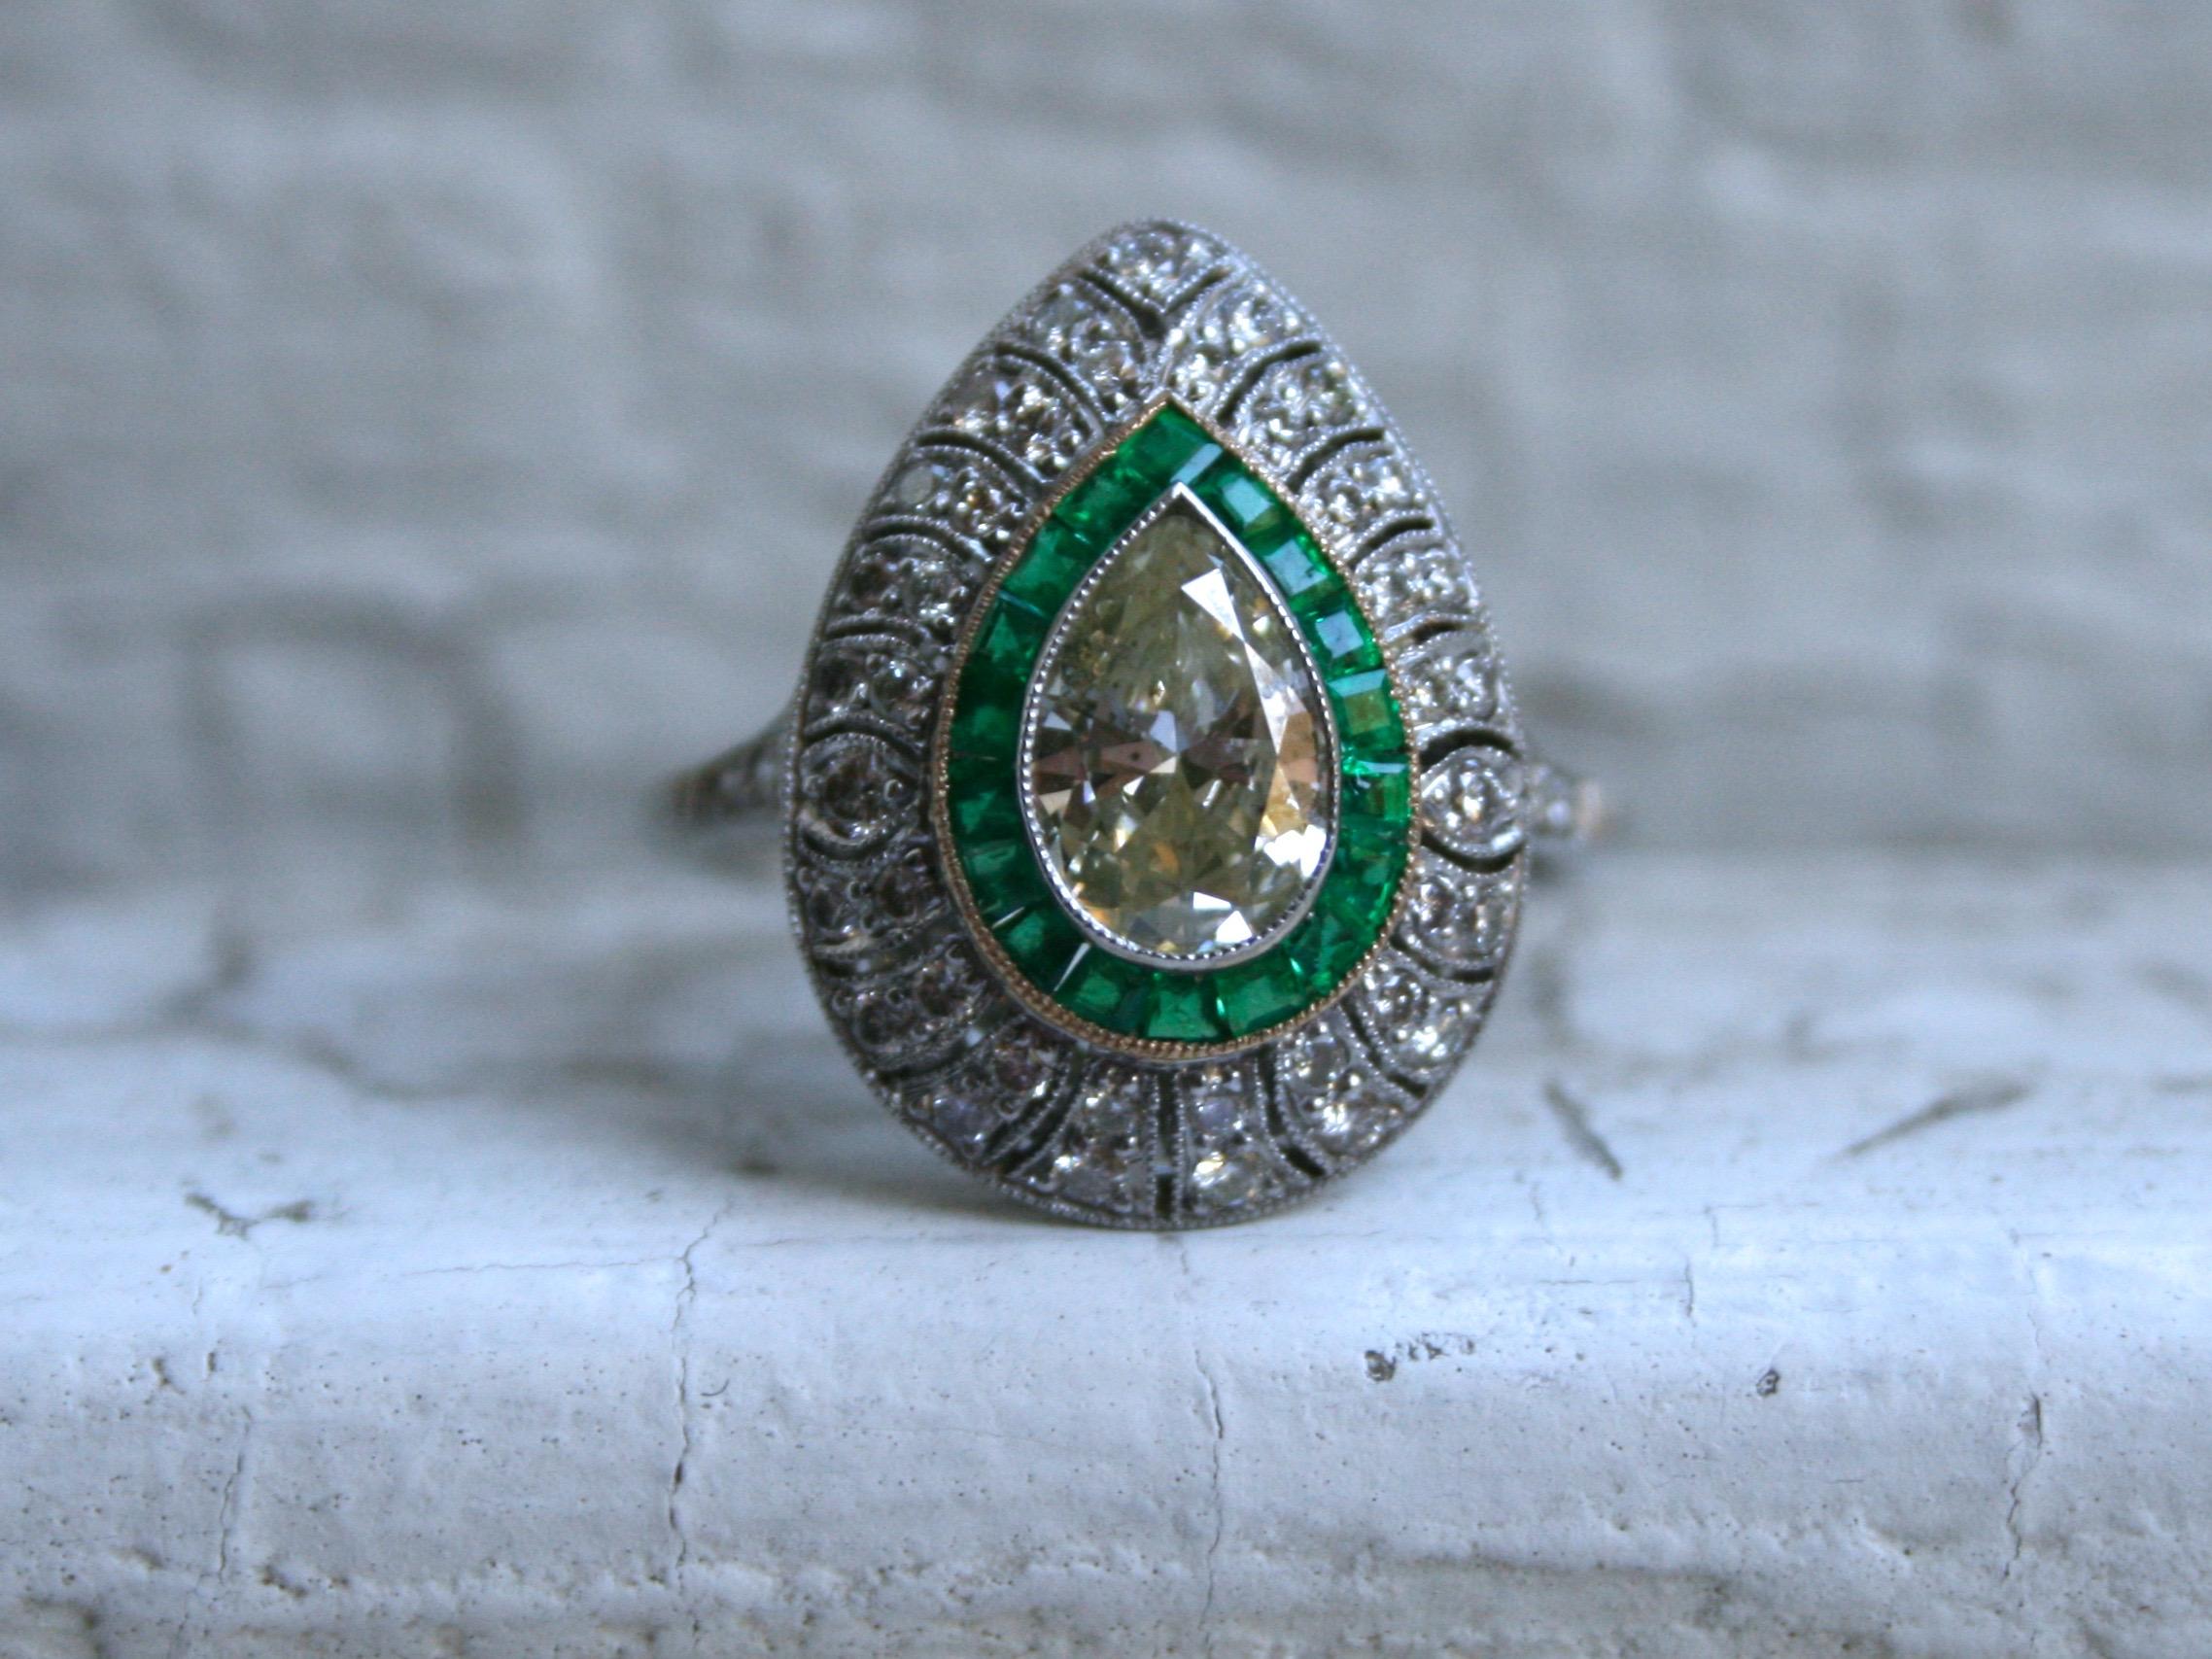 Oh my goodness this Stunning Pear Cut Diamond and Emerald Halo Ring Engagement Ring in Platinum is GORGEOUS! It's such a detailed, elegant piece! Crafted in Platinum, the design features a beautiful Pear Cut Diamond center, surrounded by a gorgeous